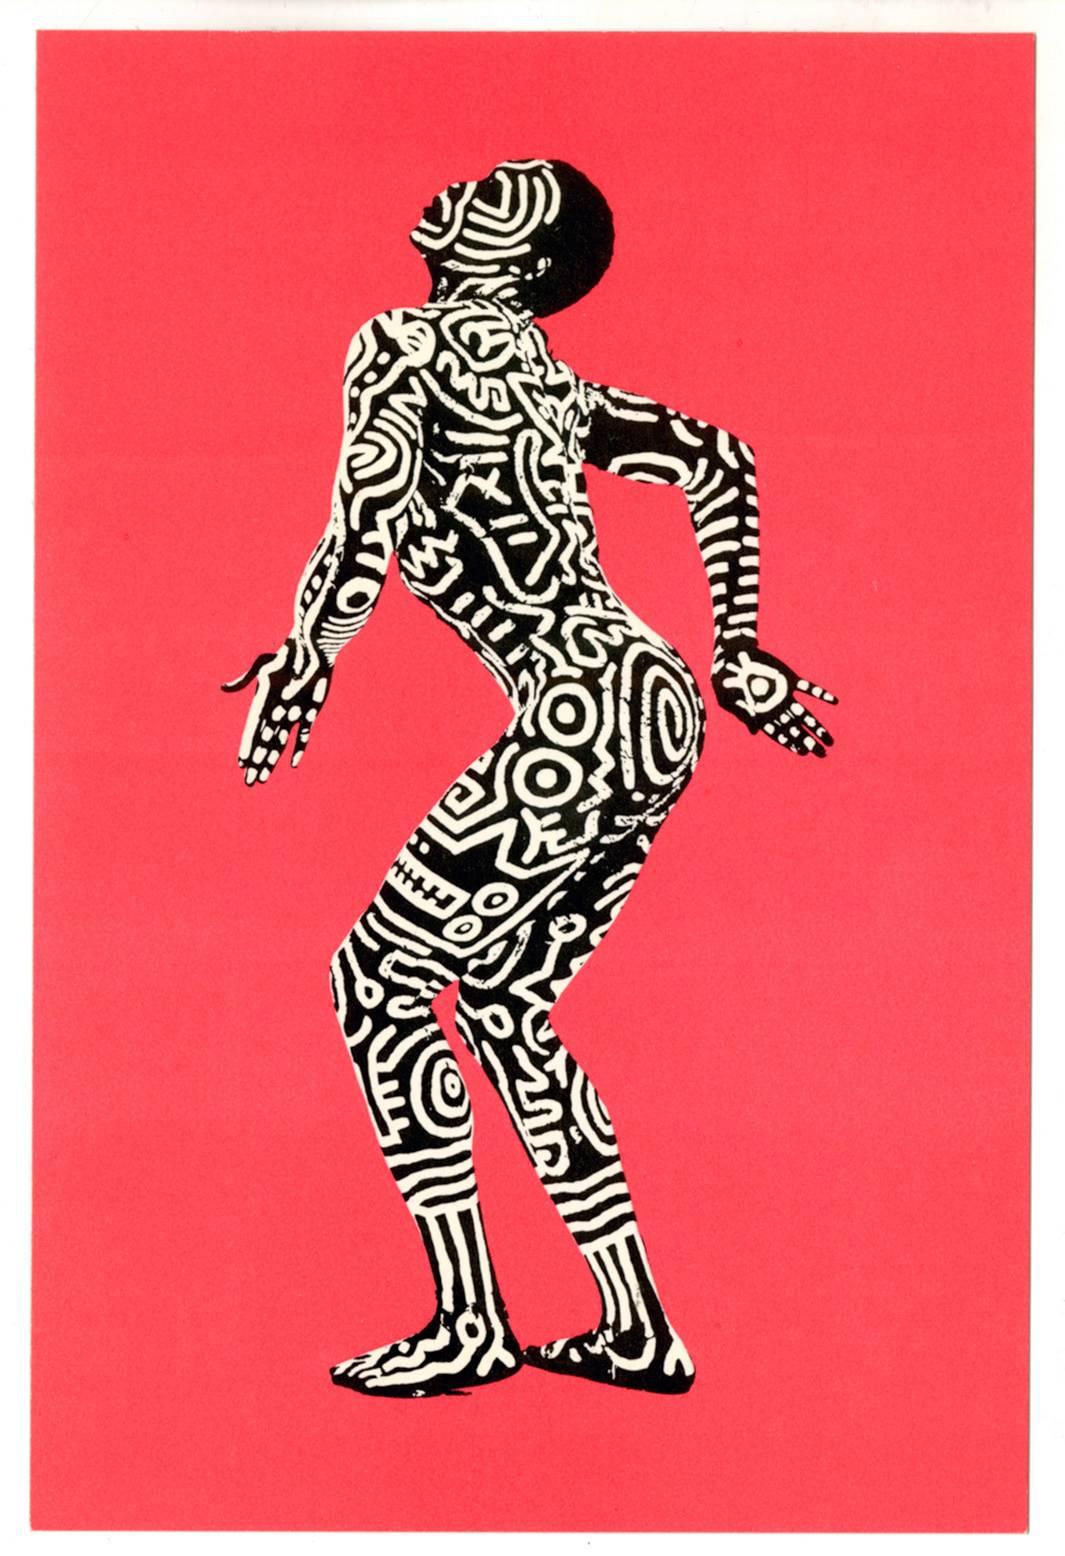 'Keith Haring Painted Man'/Keith Haring Into 84: 
A complete set of 3 announcement cards for Keith Haring’s well-documented exhibition, 'Into 84' at Tony Shafrazi Gallery, New York, 1983.  For this series Haring borrowed Jones' body — from head to